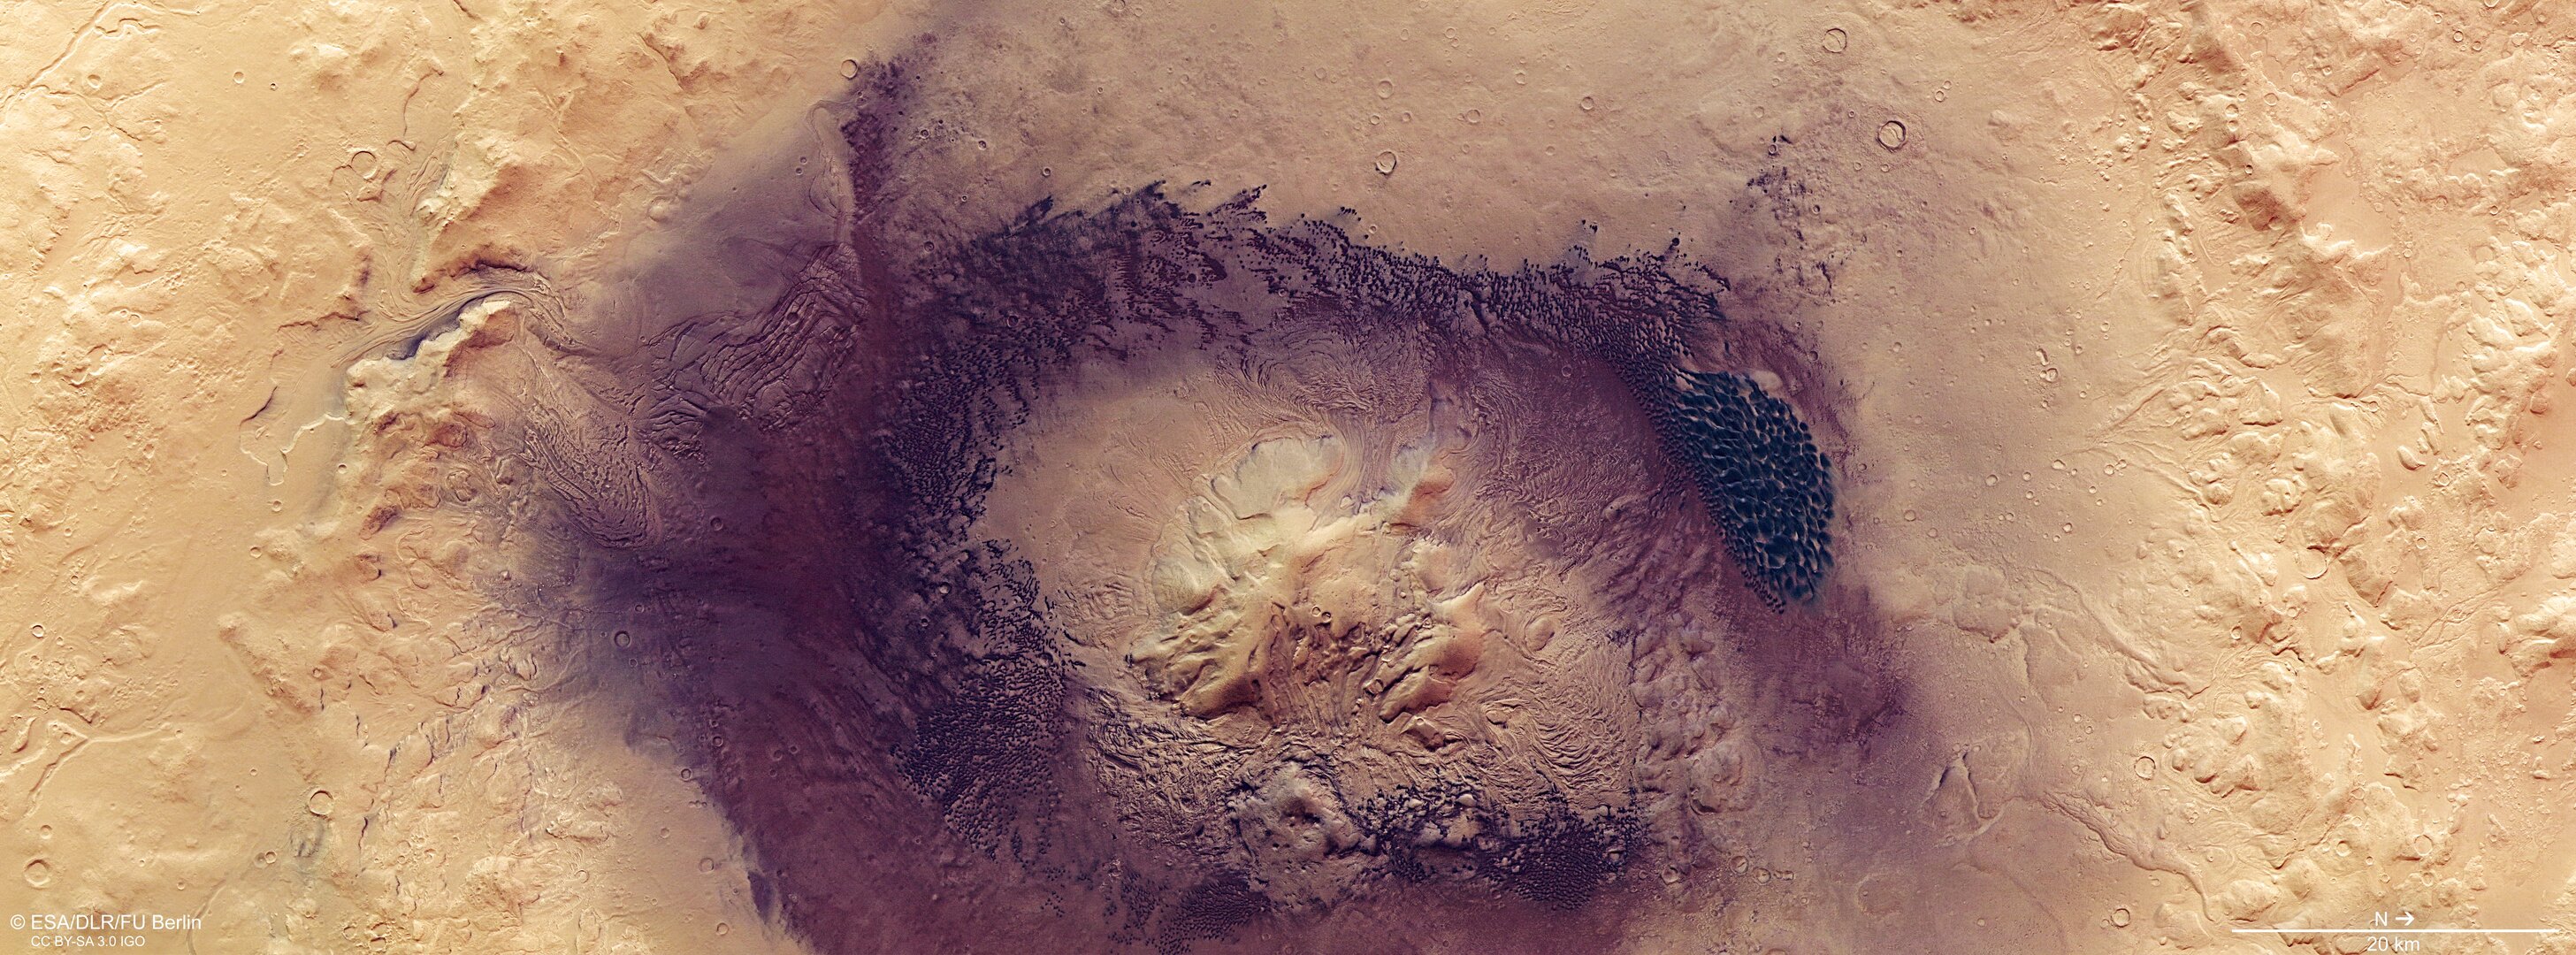 The dark dunes of Moreux crater